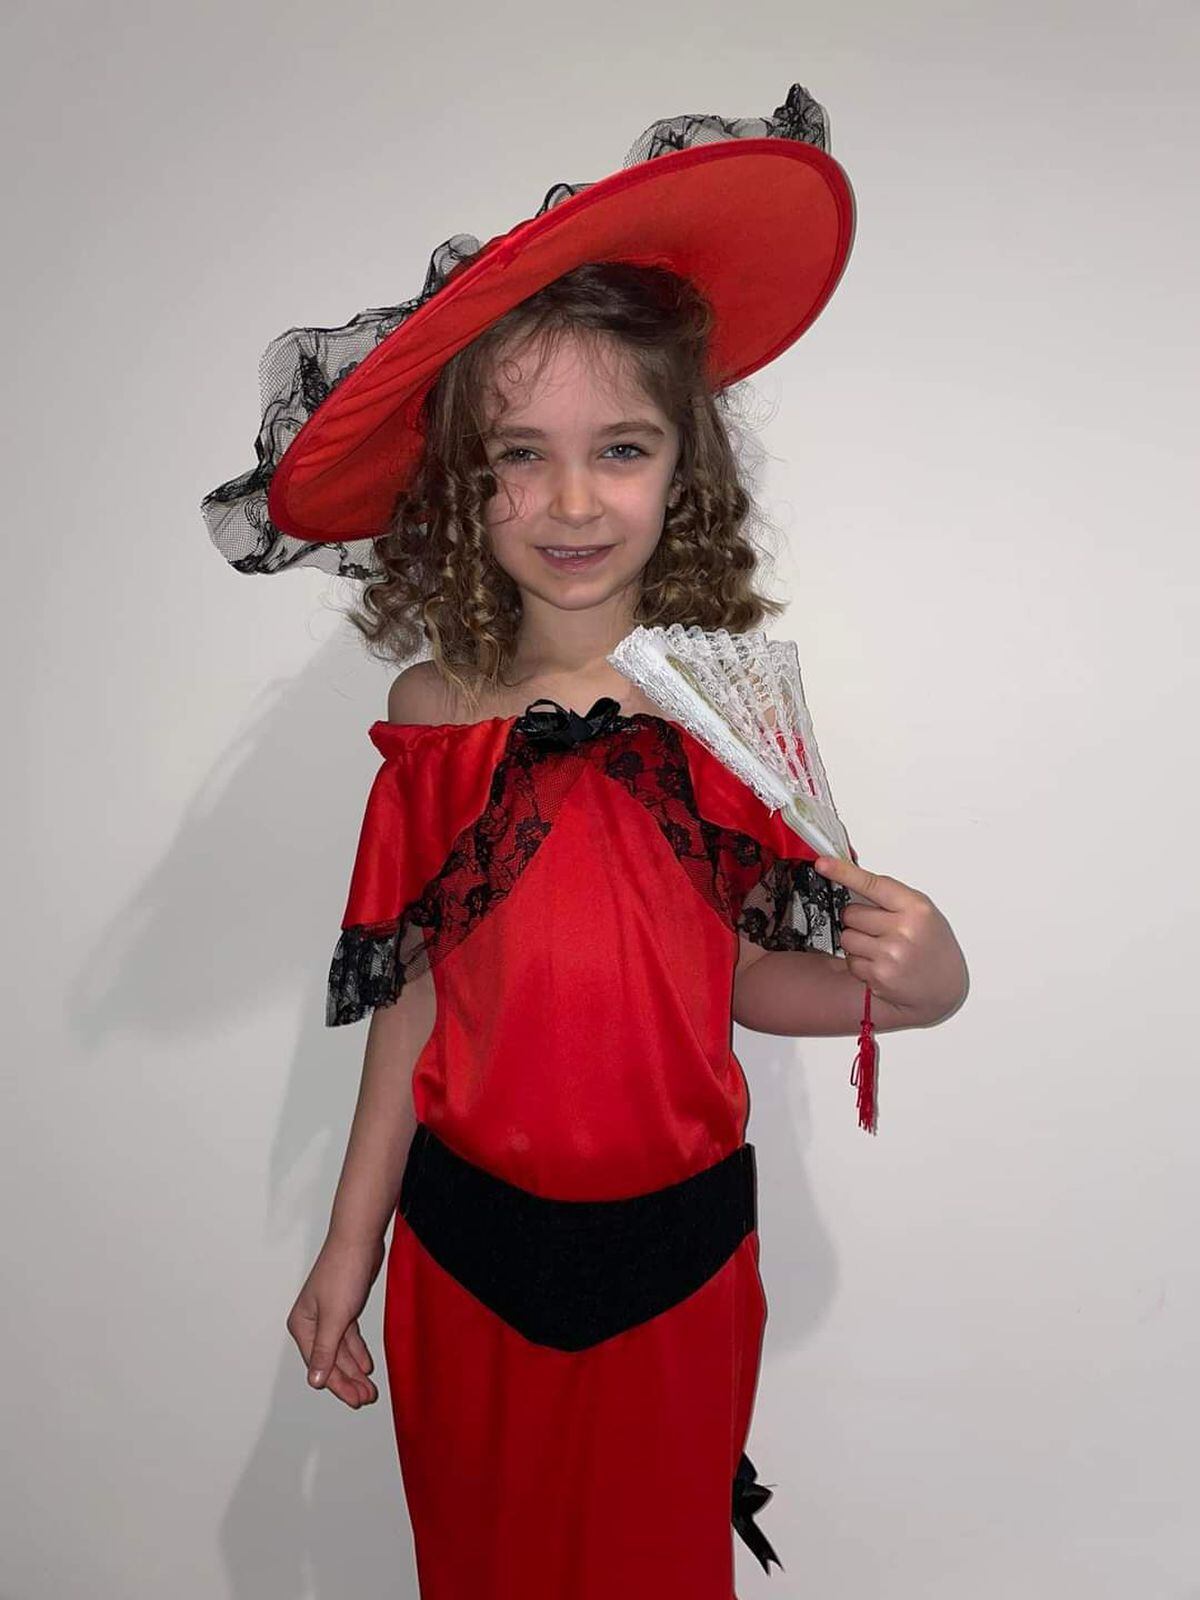 Jessica Lily dressed as Scarlett Ohara from Gone With The Wind